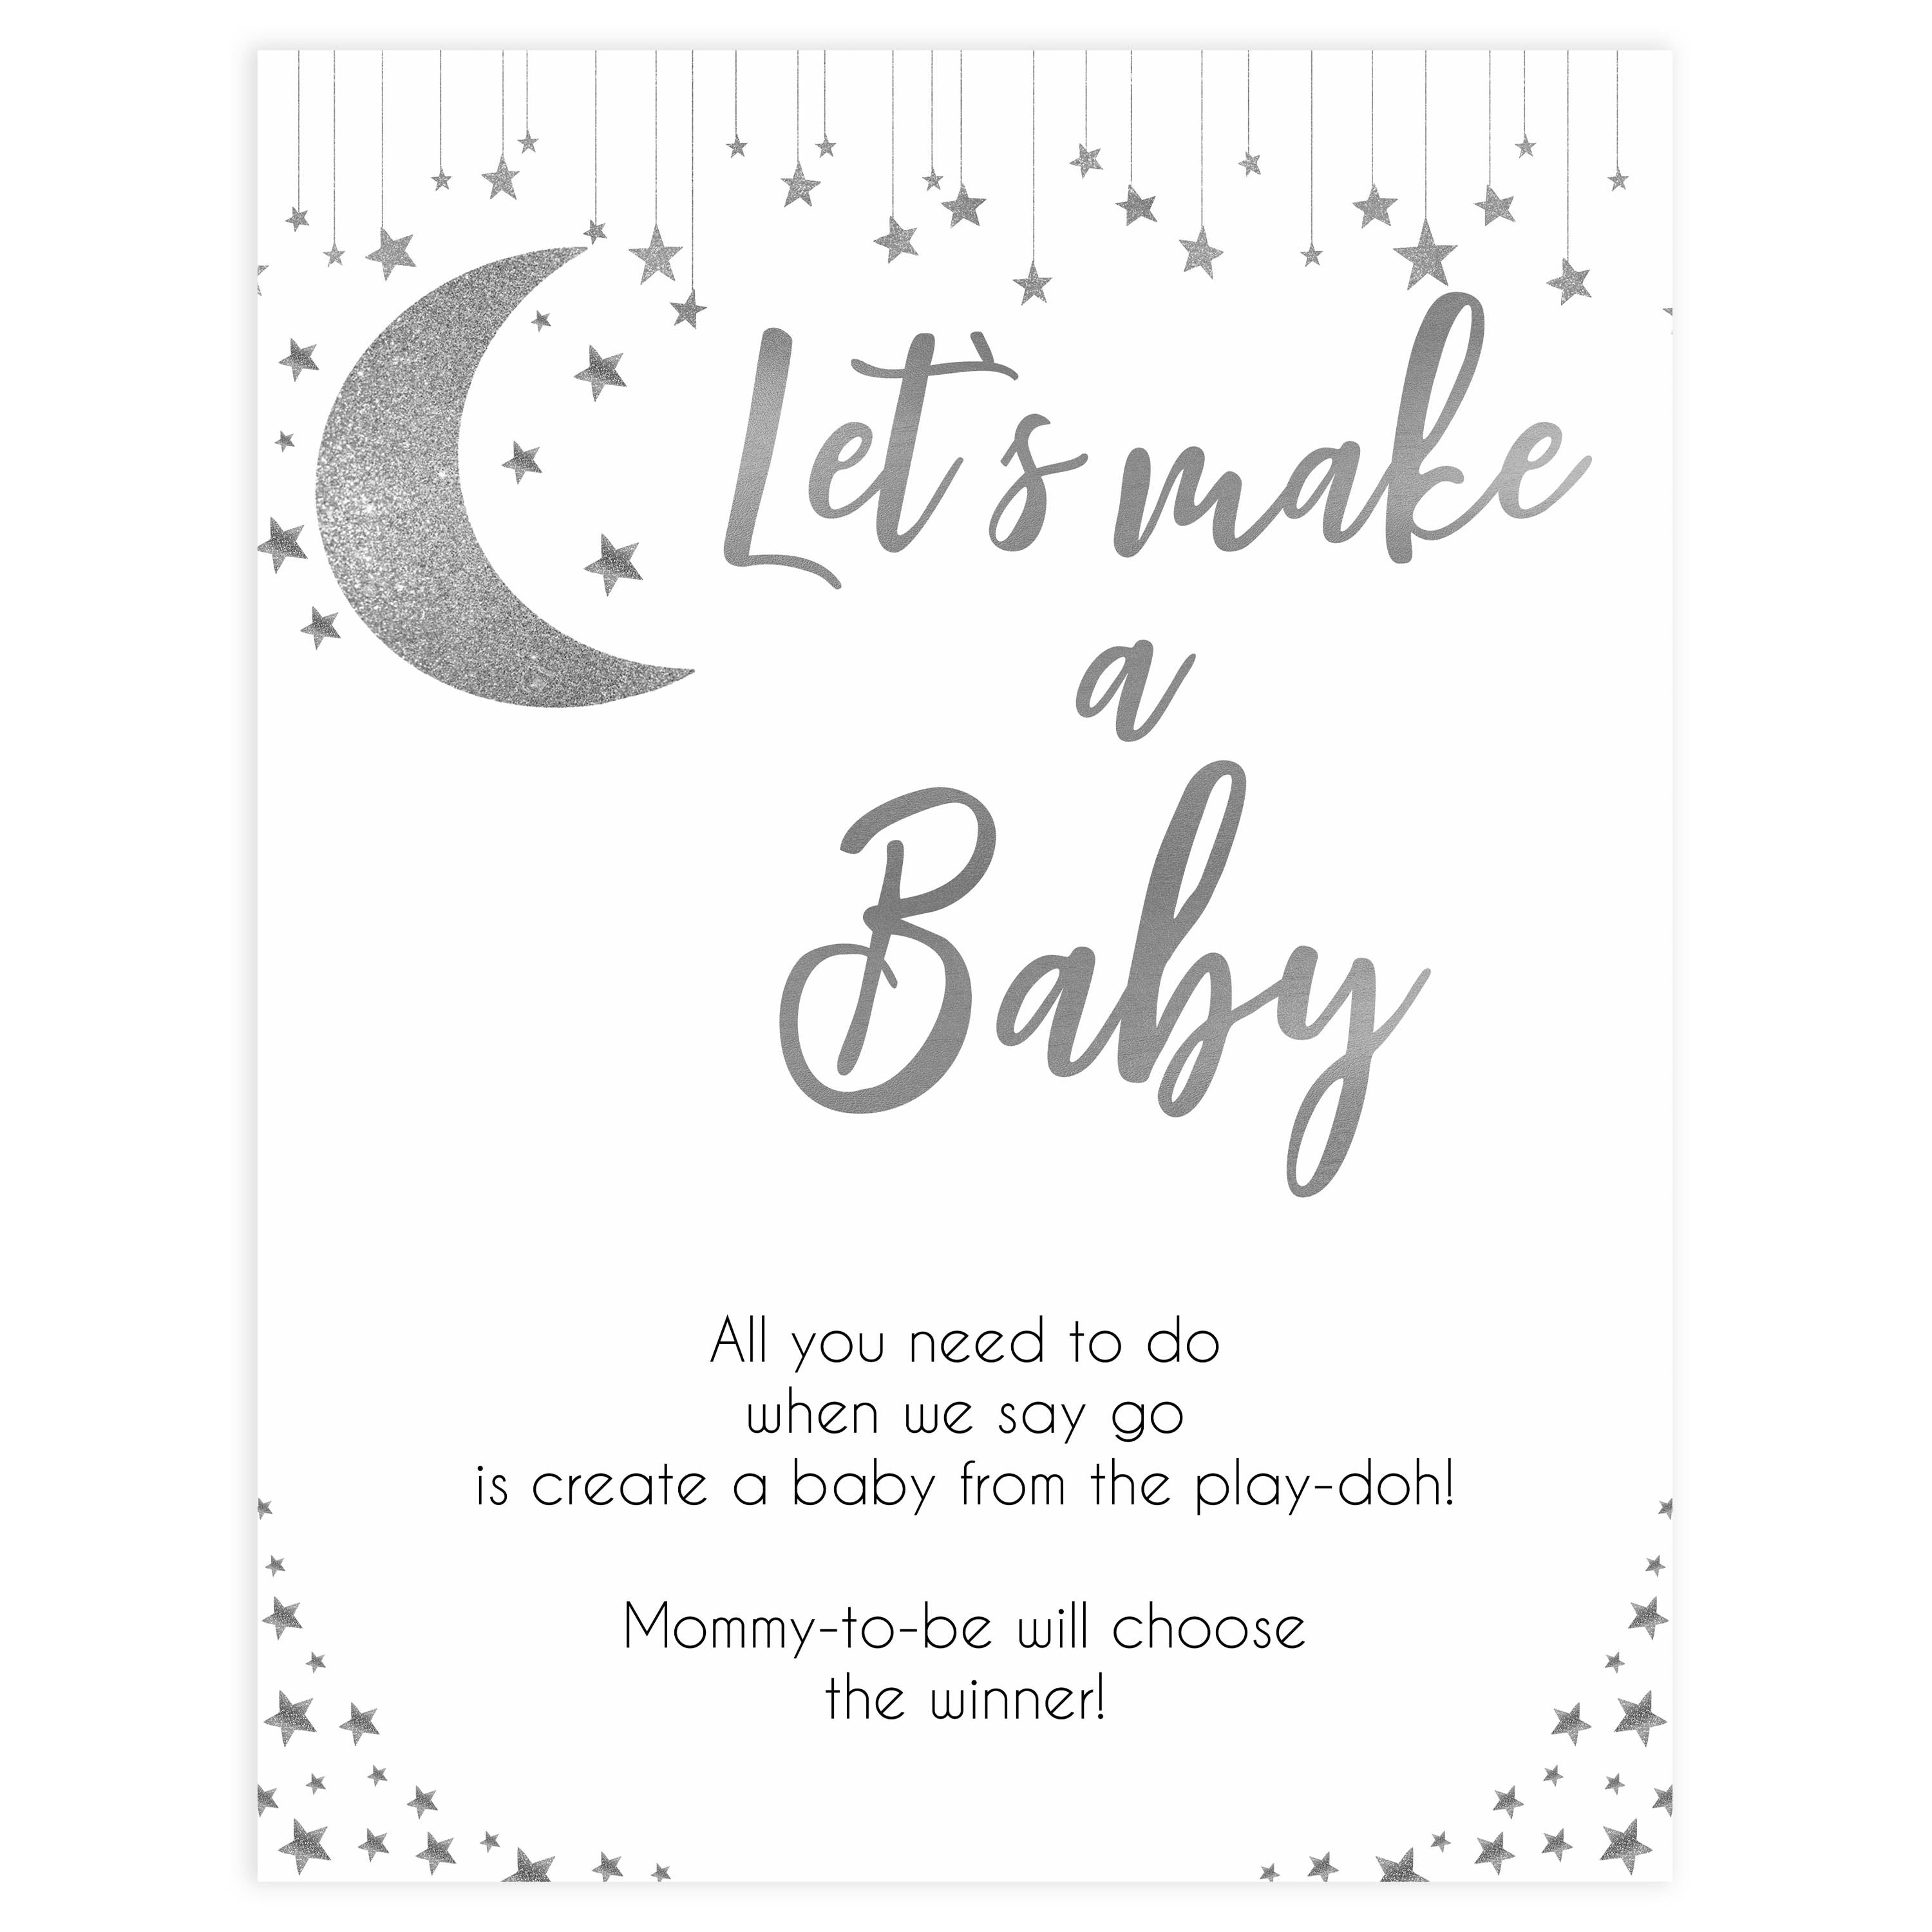 Lets make a baby game, Little star baby shower games, printable baby shower games, twinkle star baby shower, fun baby games, top baby shower ideas